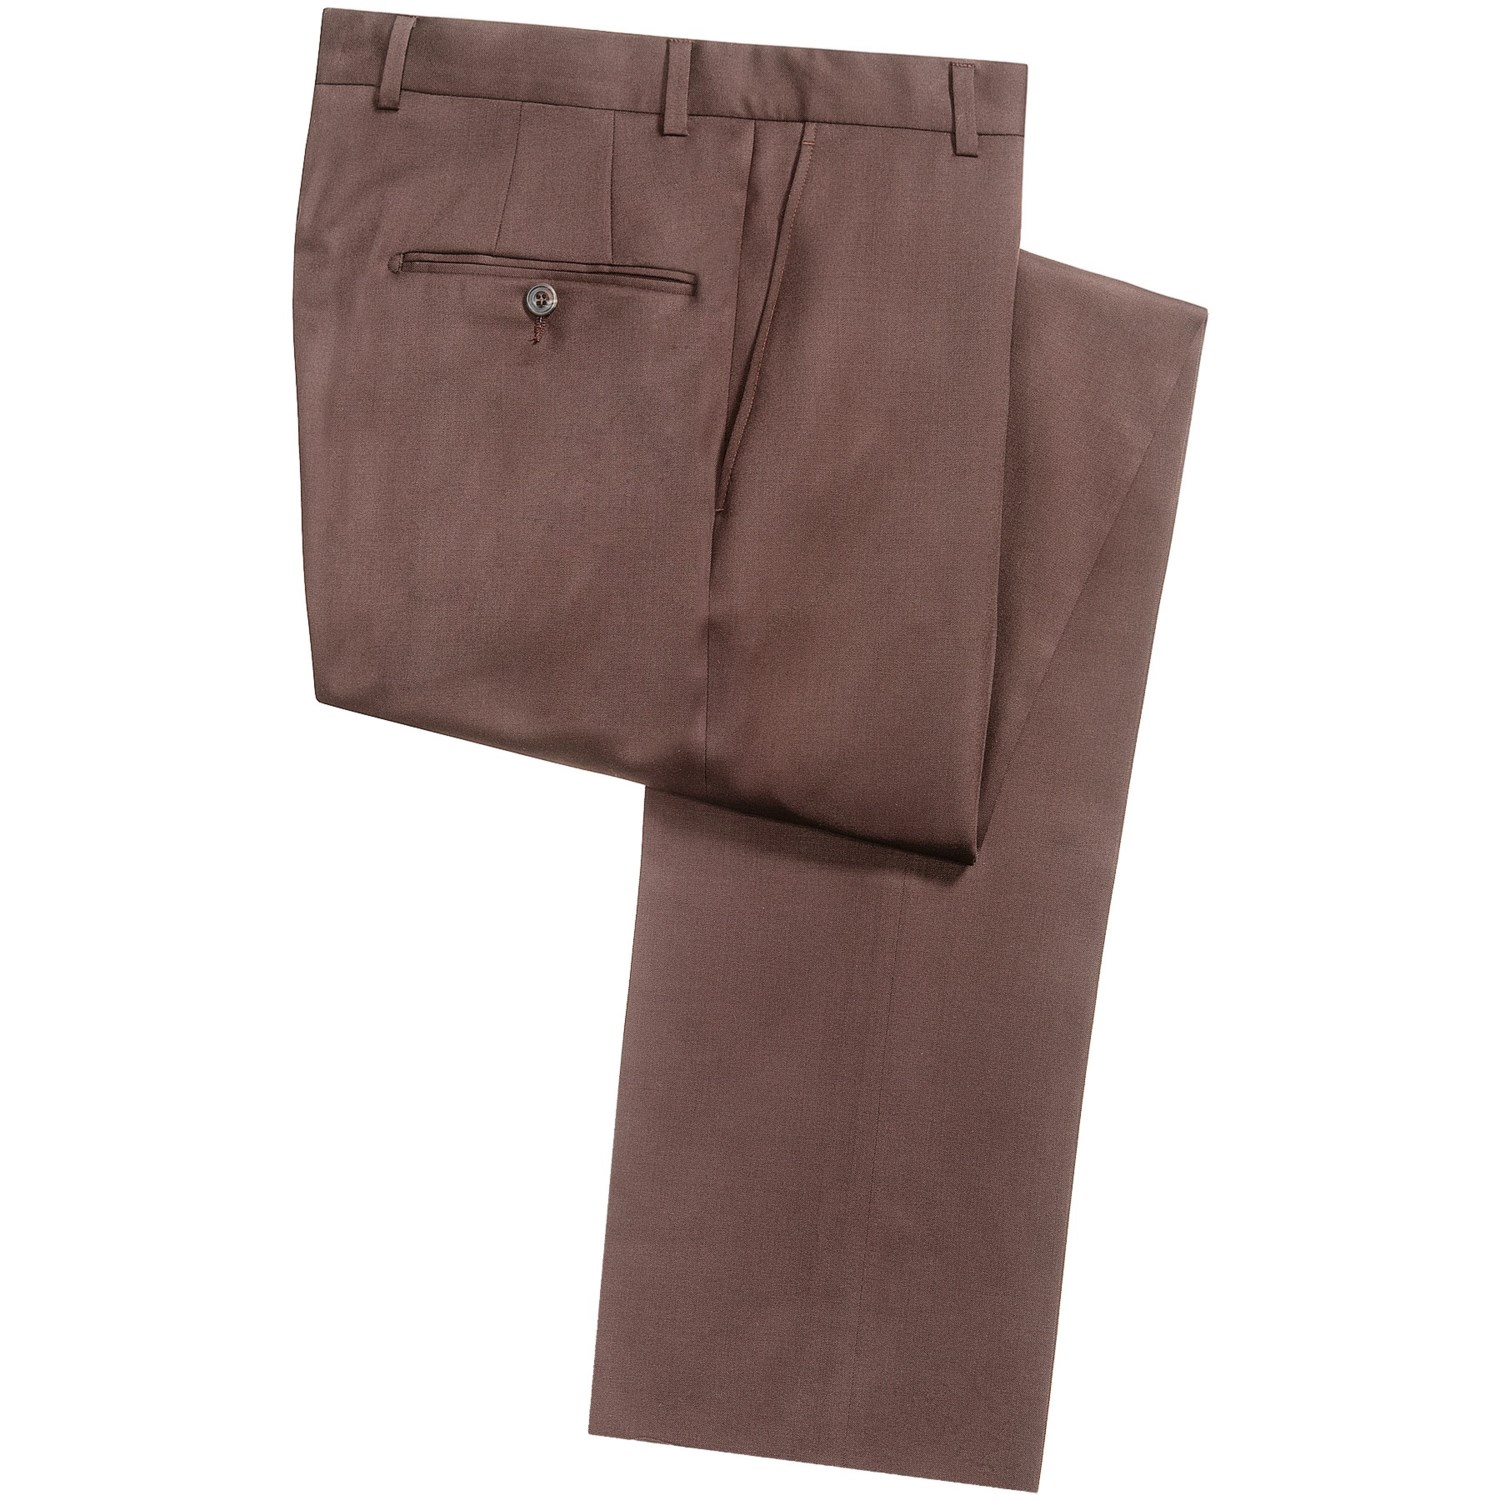 Hickey Freeman Worsted Wool Dress Pants - Flat Front (For Men)